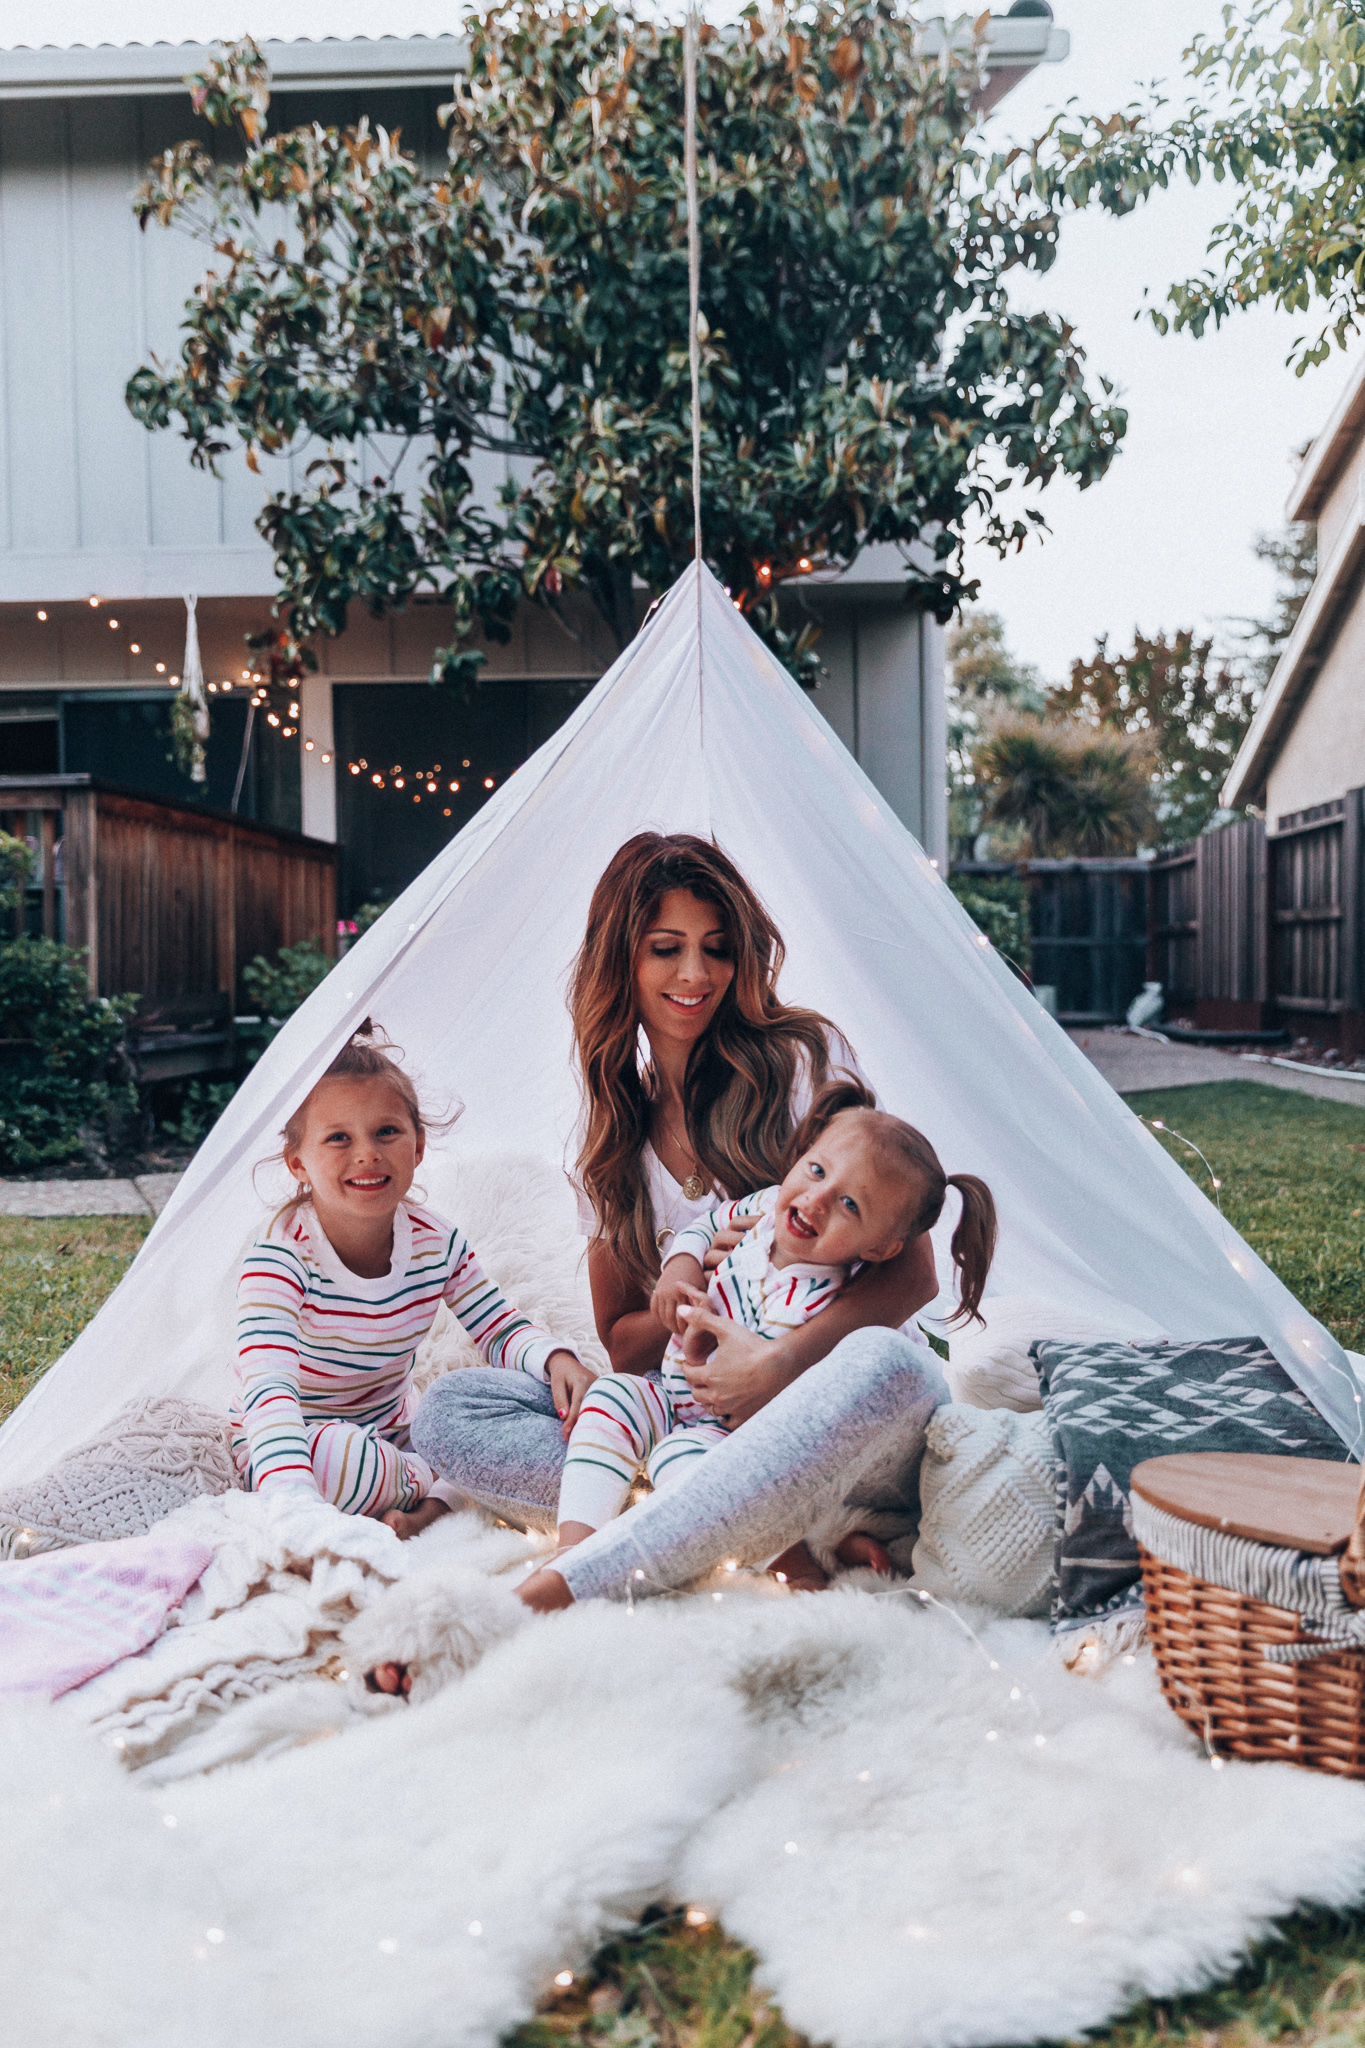 Fun Summer Activities for Kids-Part 2 by popular mom blog The Girl in the Yellow Dress: image of woman and two young girls having an outdoor picnic with their Picnic Time Country Picnic Basket in a white tent.  Woman is wearing an Ivory Aerie Arlo Pocket Tee and Aerie Plush Harem Jogger.  The two young girls are wearing Hanna Andersson Long John Pajamas In Organic Cotton.